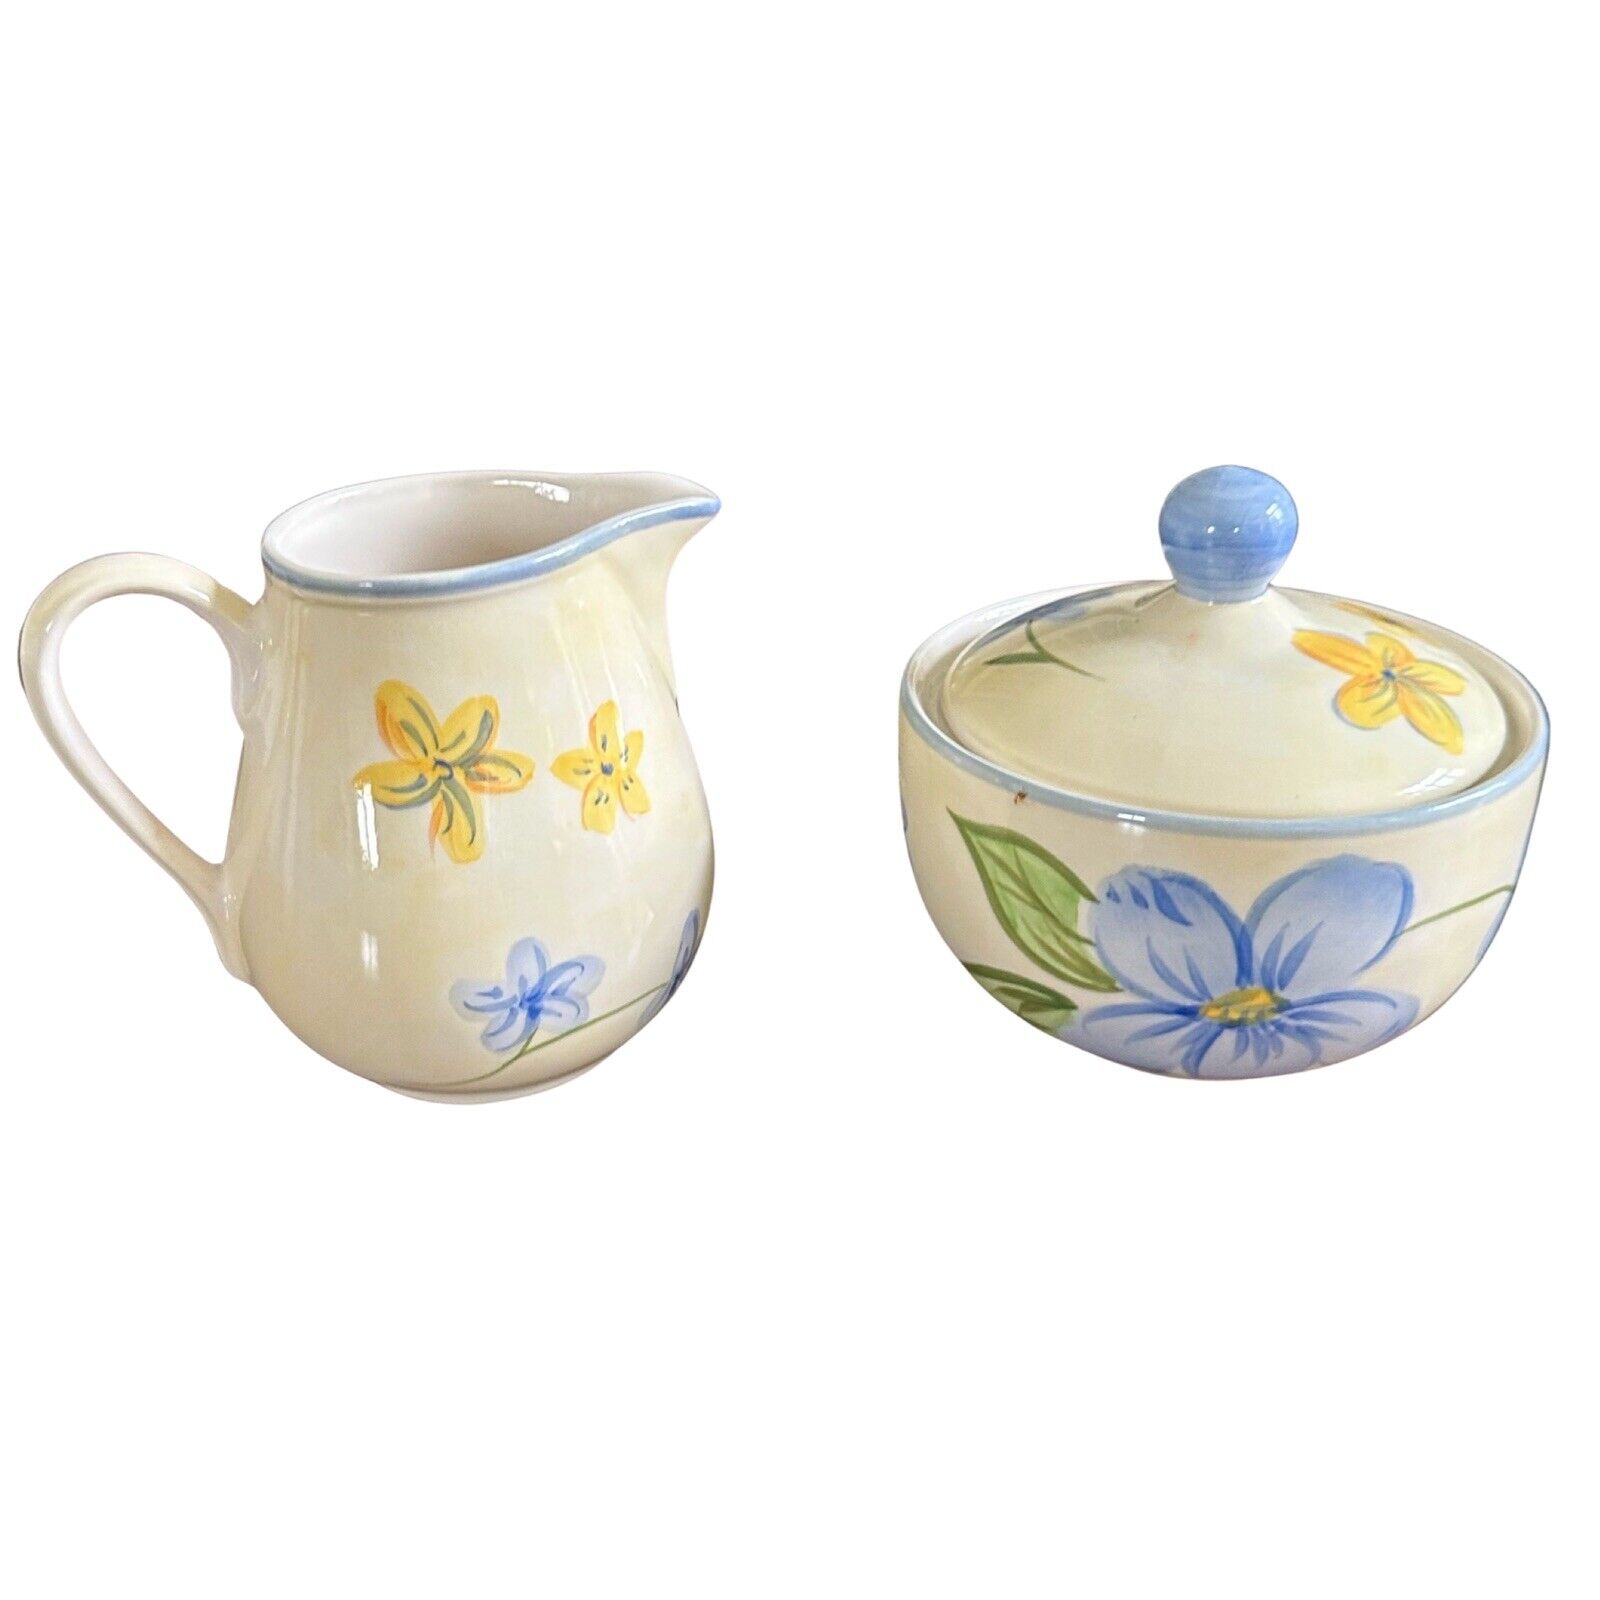 April Cornell Vintage 2001 Yellow/Blue Floral Creamer & Sugar Bowl With Lid